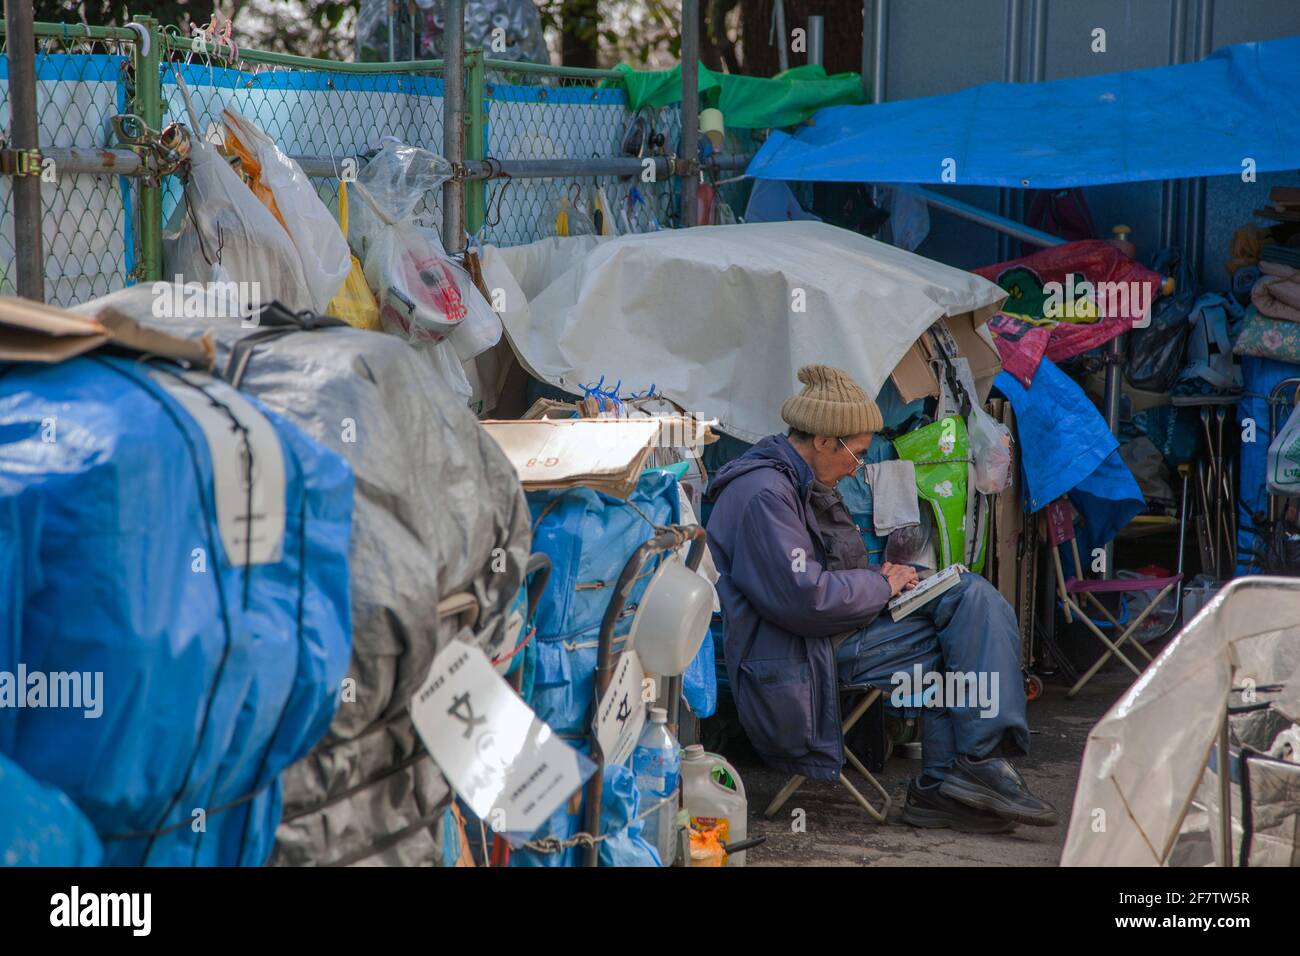 Japanese homeless man sits reading manga comic in area housing his possessions in Ueno Park, Tokyo, Japan Stock Photo